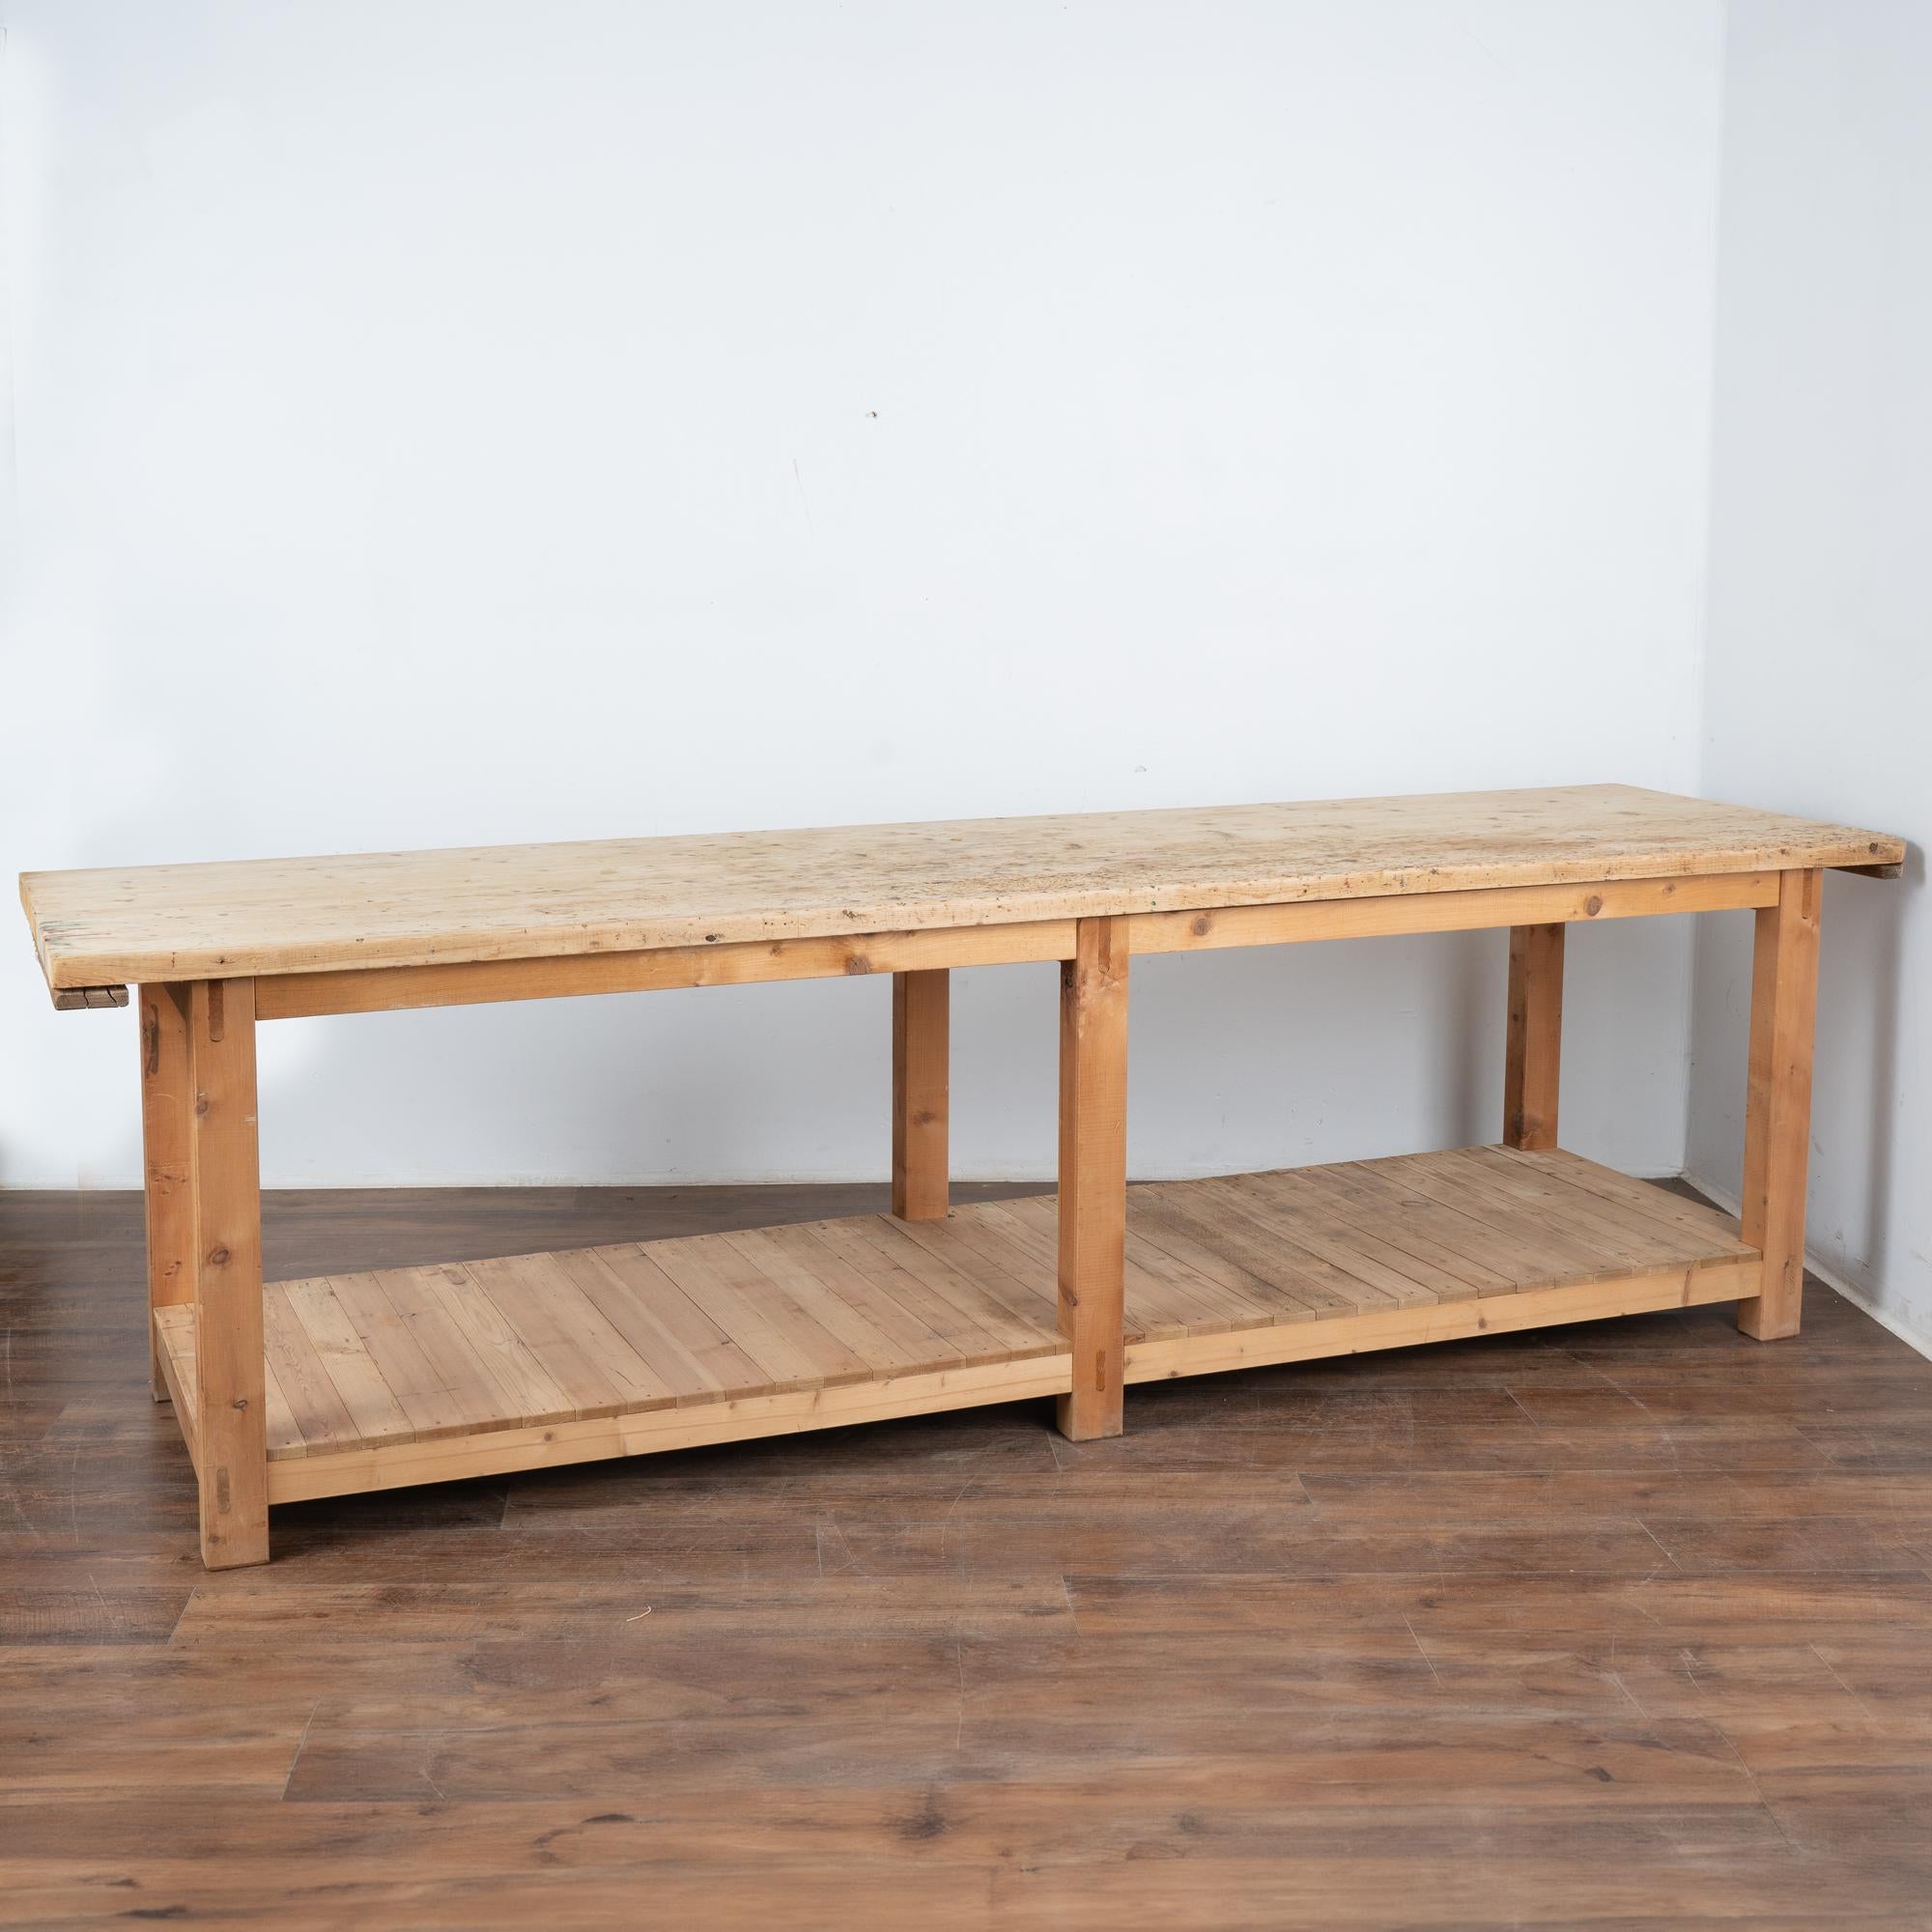 Rustic 10' Long Work Table Kitchen Island With Shelf, Hungary circa 1900 For Sale 11